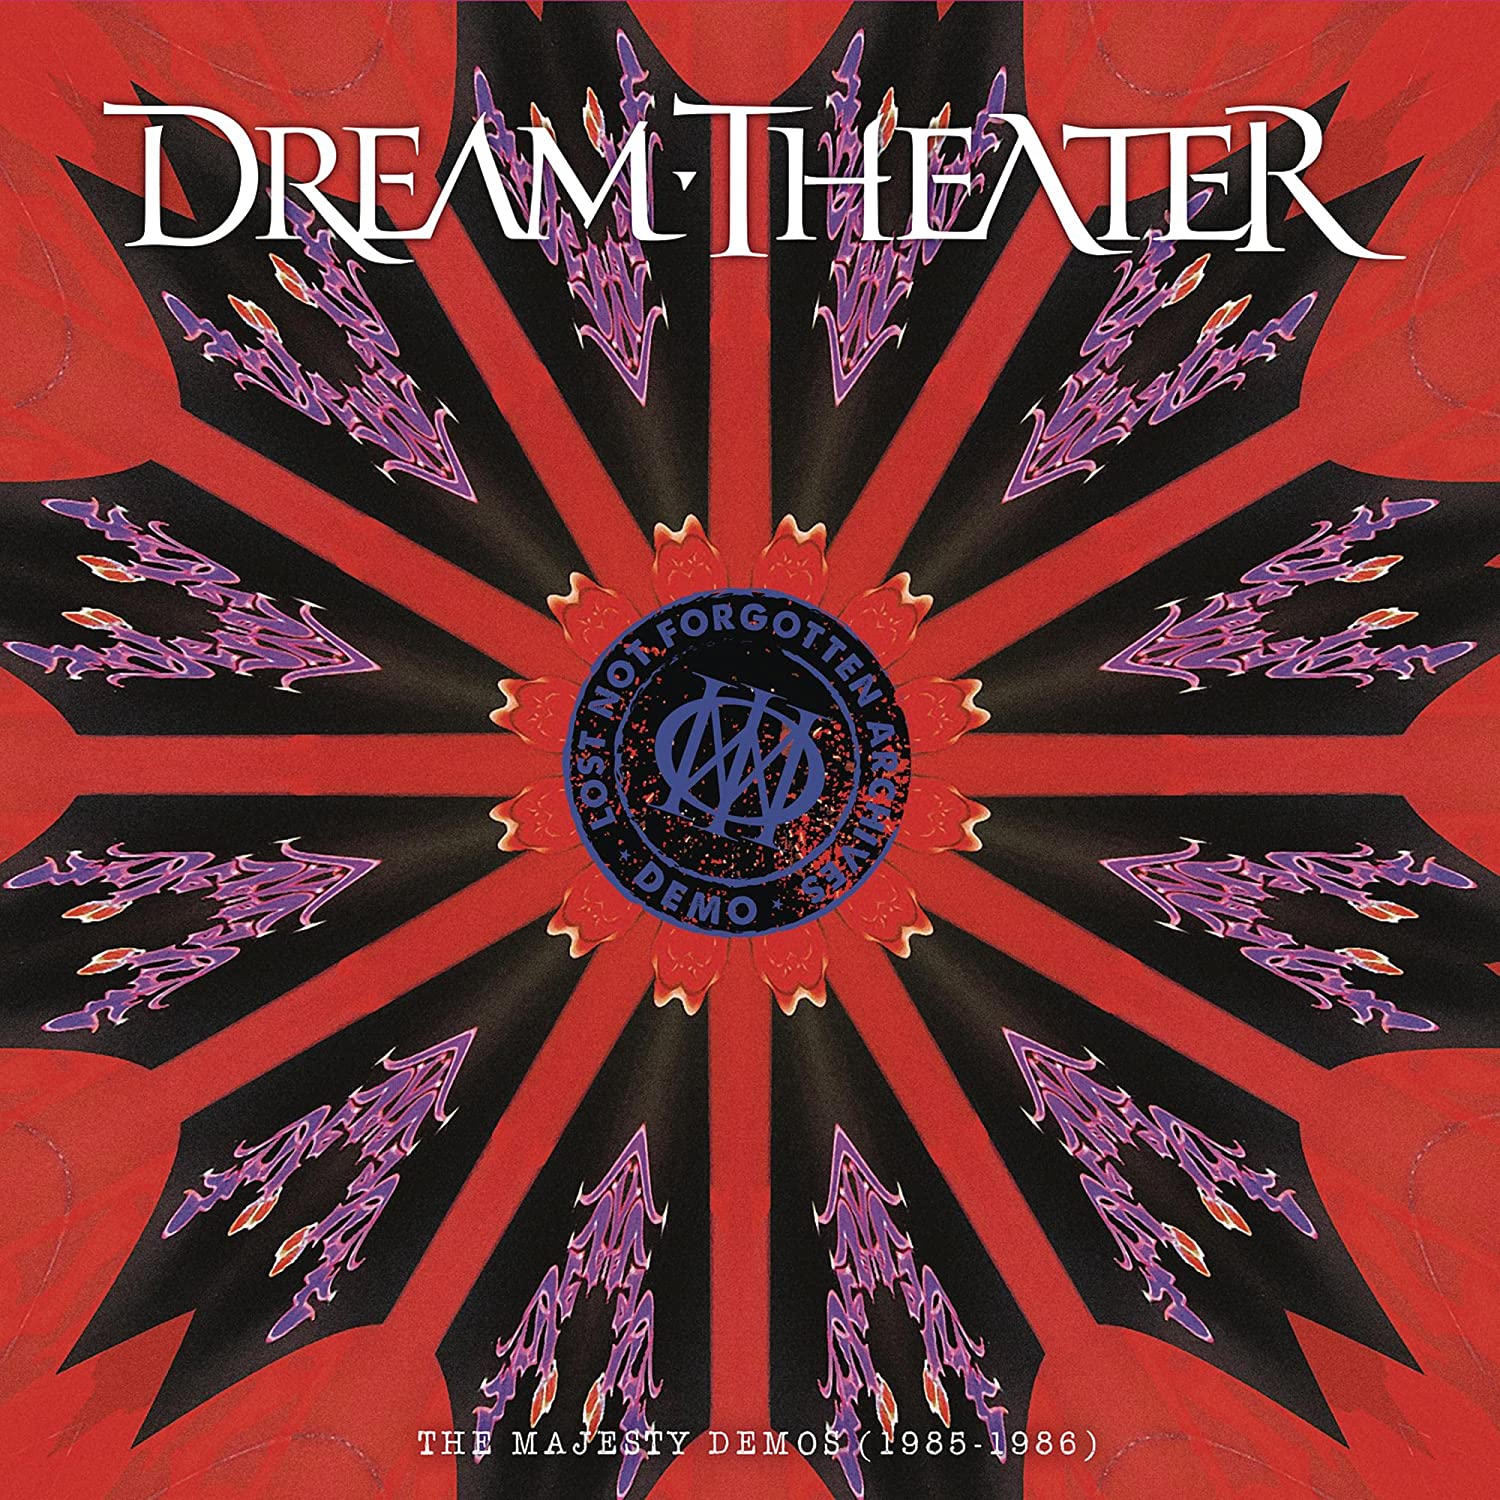 Lost Not Forgotten Archives: The Majesty Demos | Dream Theater